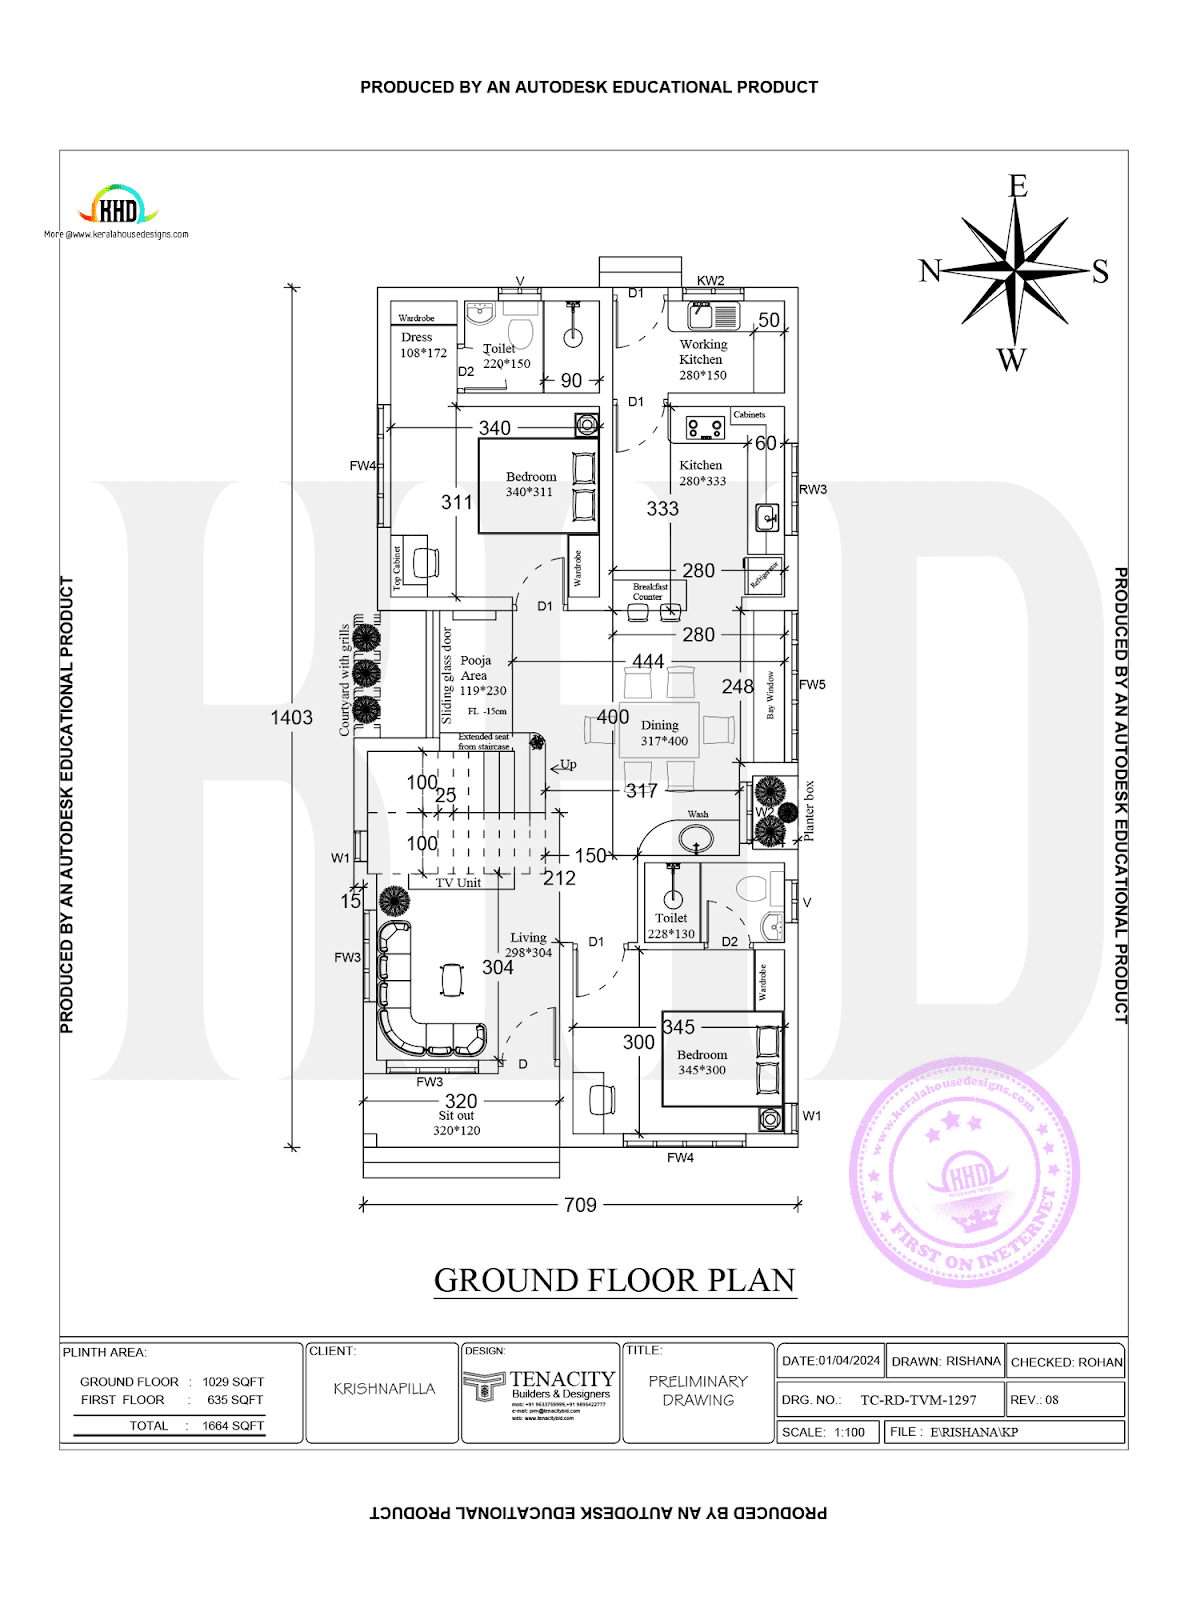 A detailed layout of the ground floor, highlighting the spacious living areas, bedrooms, kitchen, and other amenities.